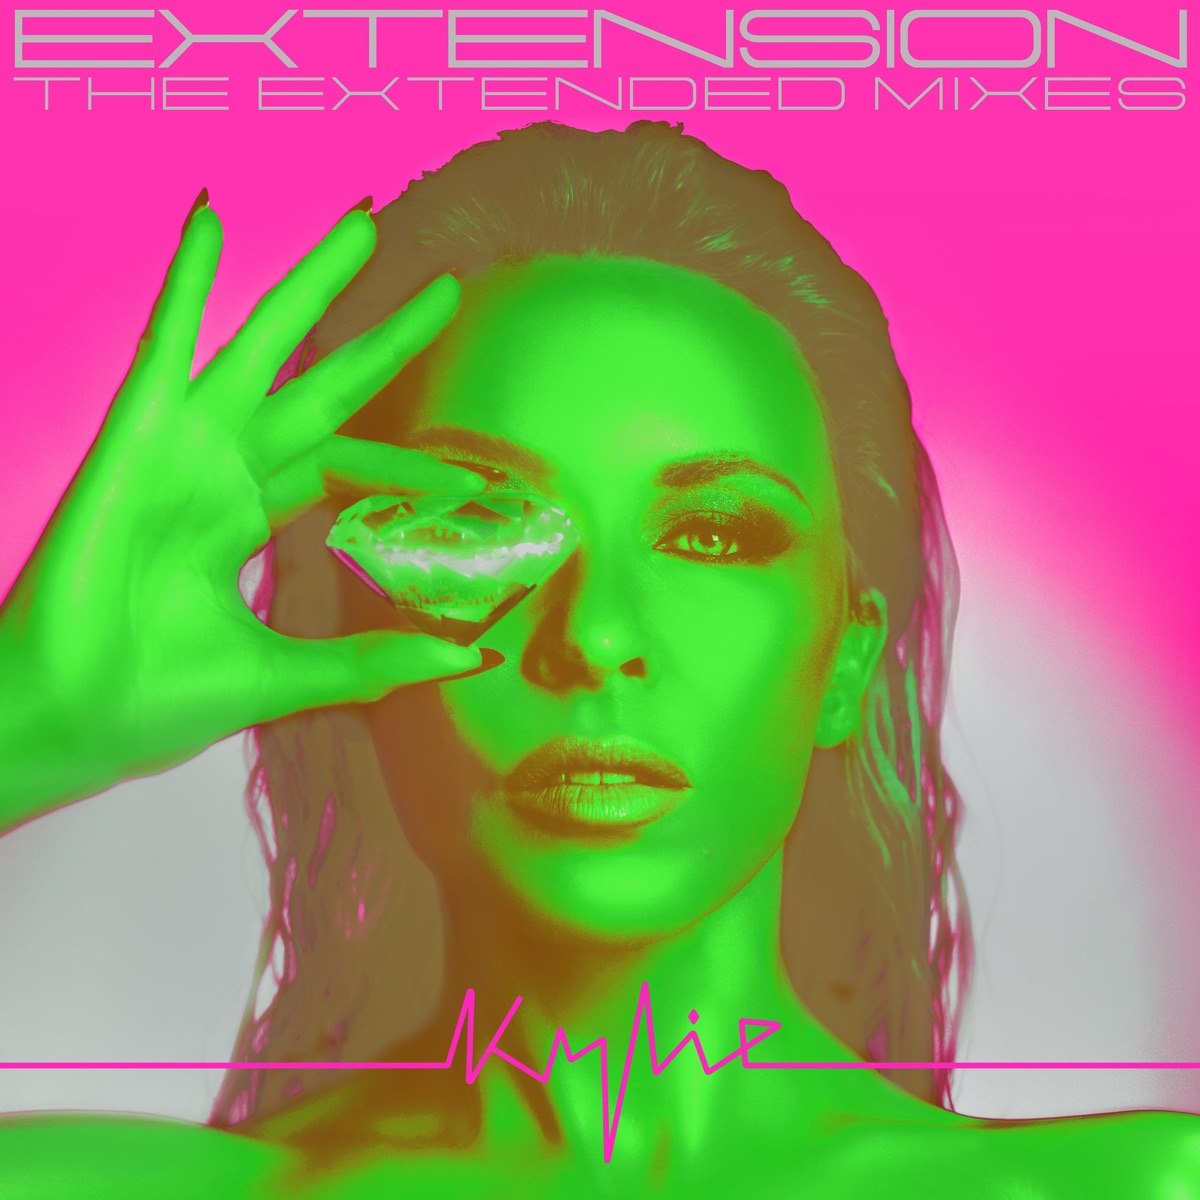 Kylie Minogue - Extension (The Extended Mixes) Album 1